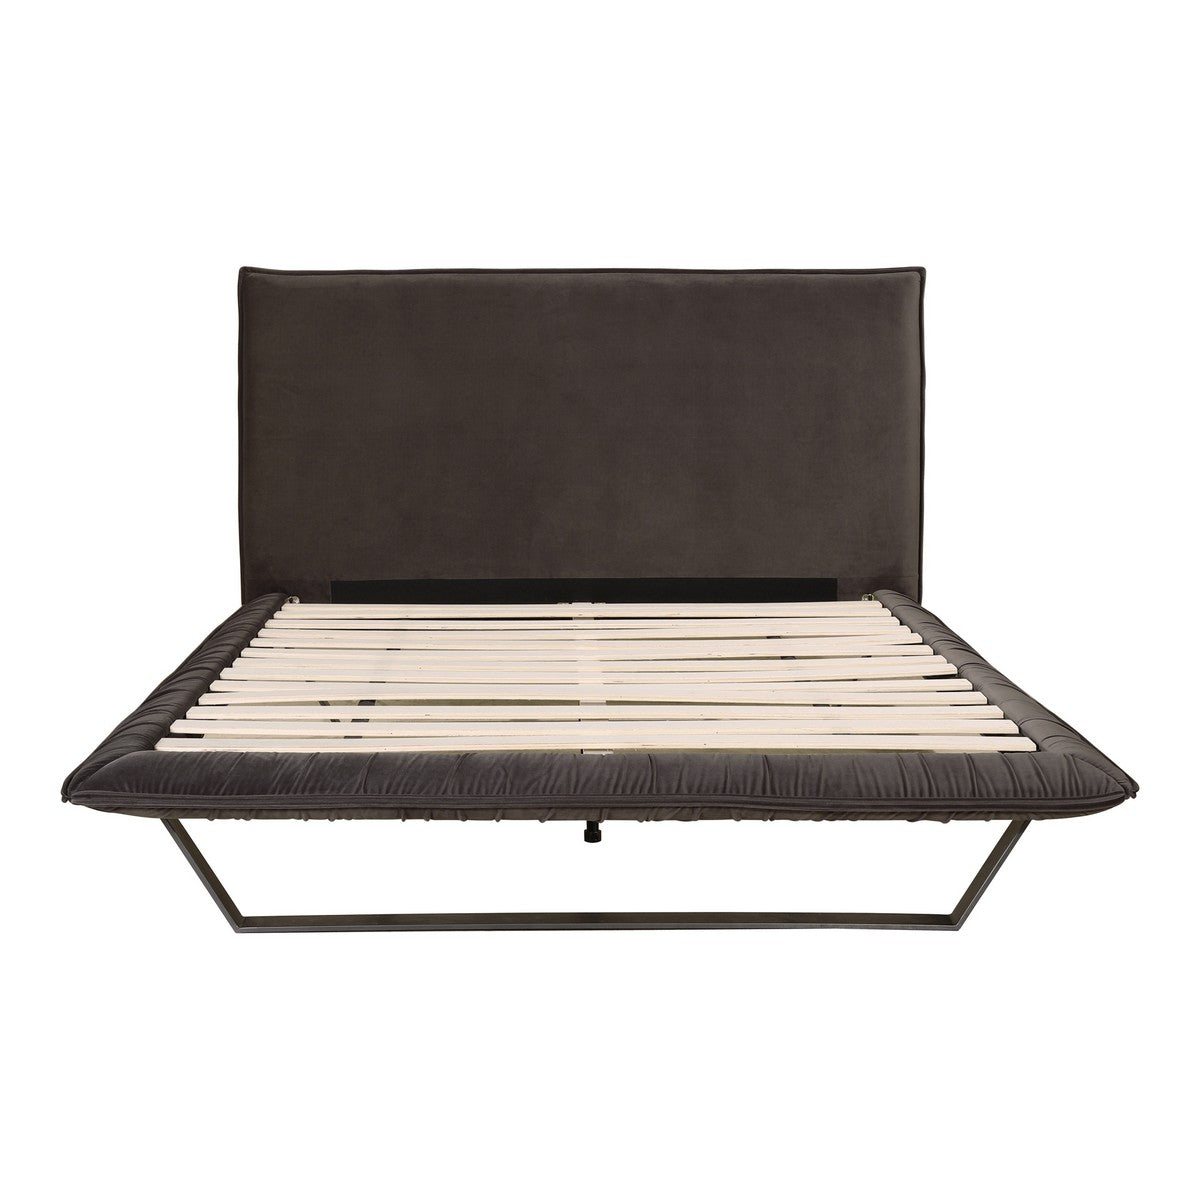 Moe's Home Collection Manilla King Bed Slate - RN-1128-25 - Moe's Home Collection - Beds - Minimal And Modern - 1